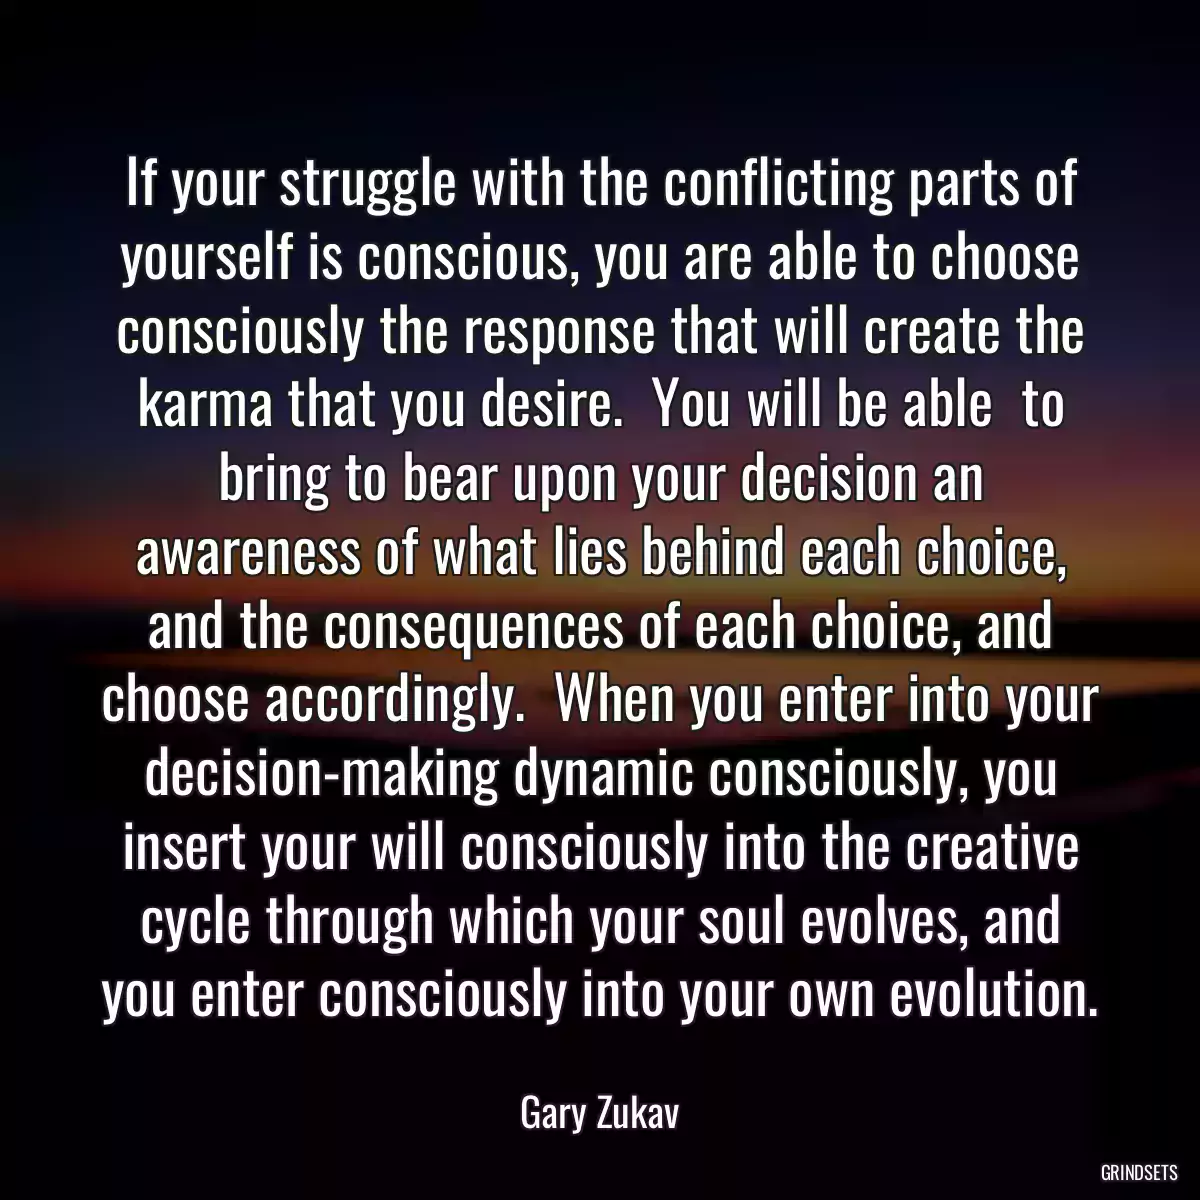 If your struggle with the conflicting parts of yourself is conscious, you are able to choose consciously the response that will create the karma that you desire.  You will be able  to bring to bear upon your decision an awareness of what lies behind each choice, and the consequences of each choice, and choose accordingly.  When you enter into your decision-making dynamic consciously, you insert your will consciously into the creative cycle through which your soul evolves, and you enter consciously into your own evolution.